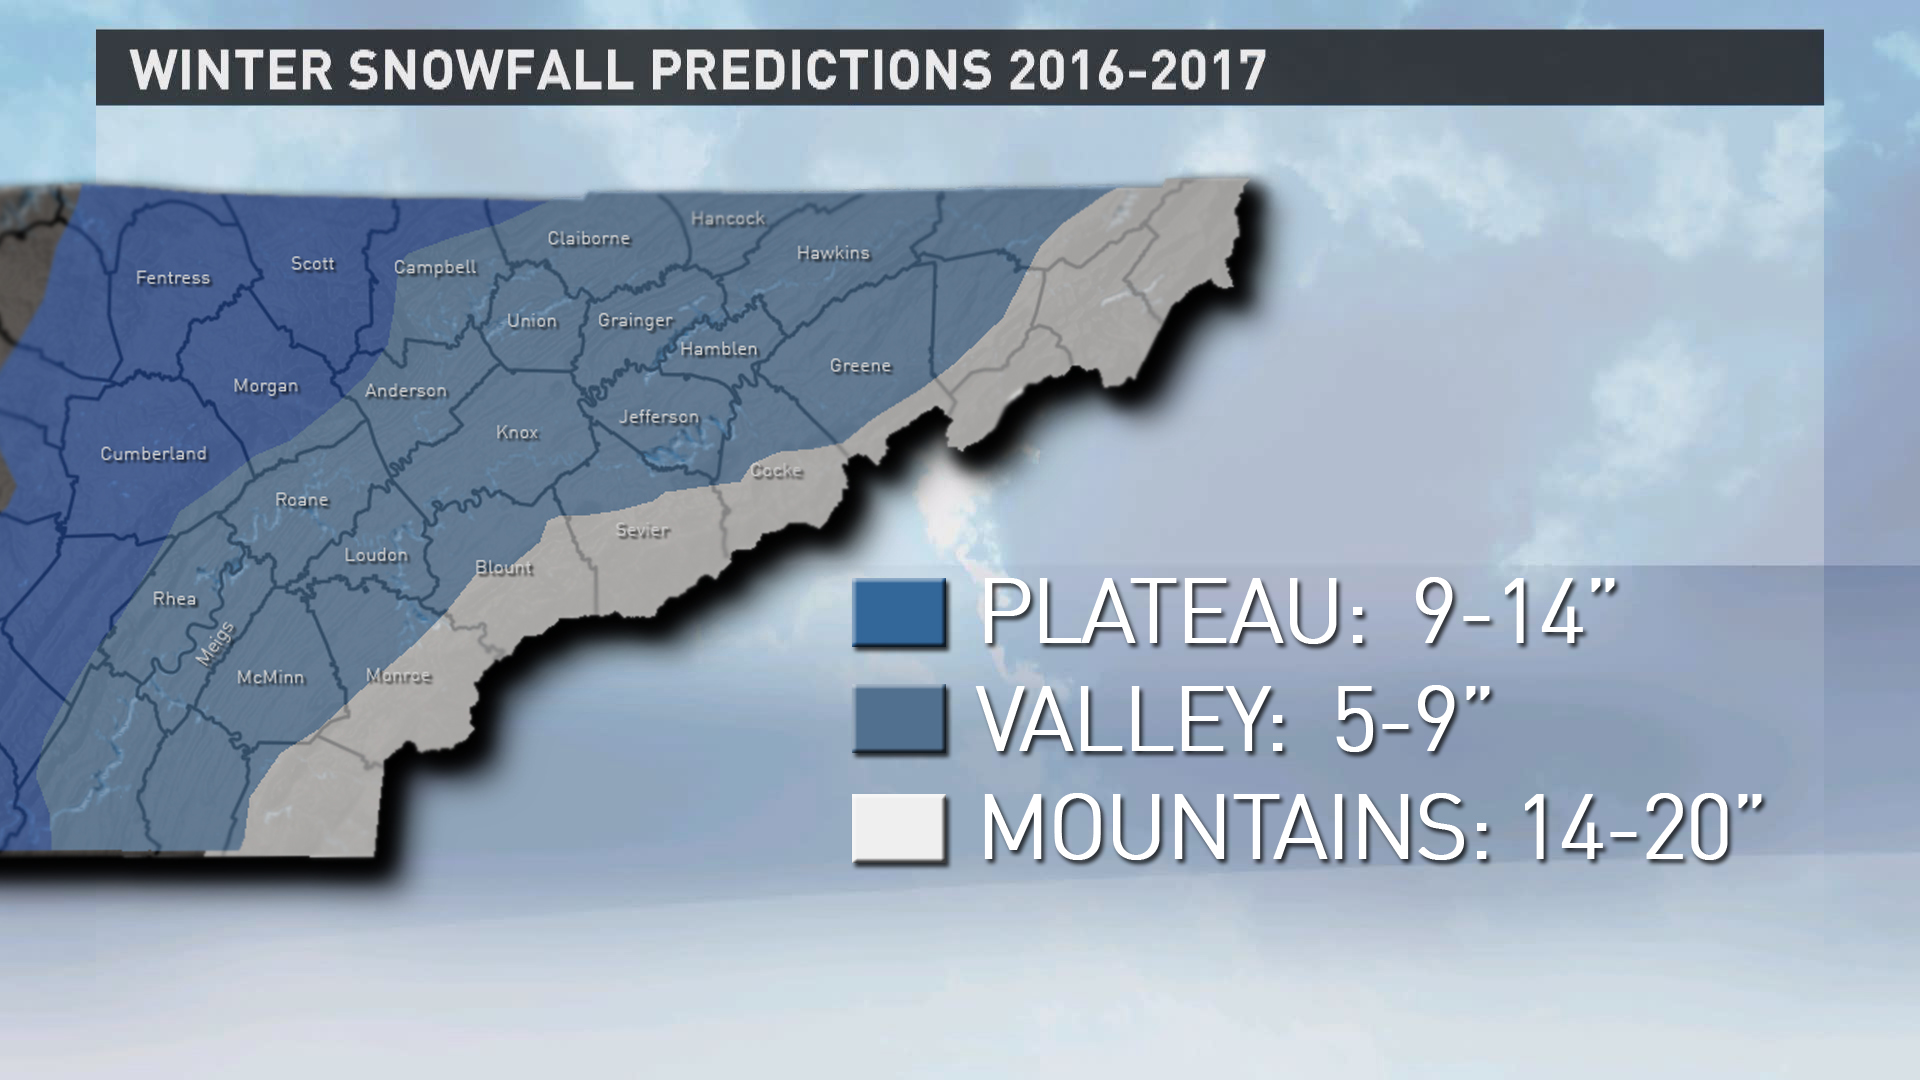 Winter is coming! Here's what to expect in East Tennessee